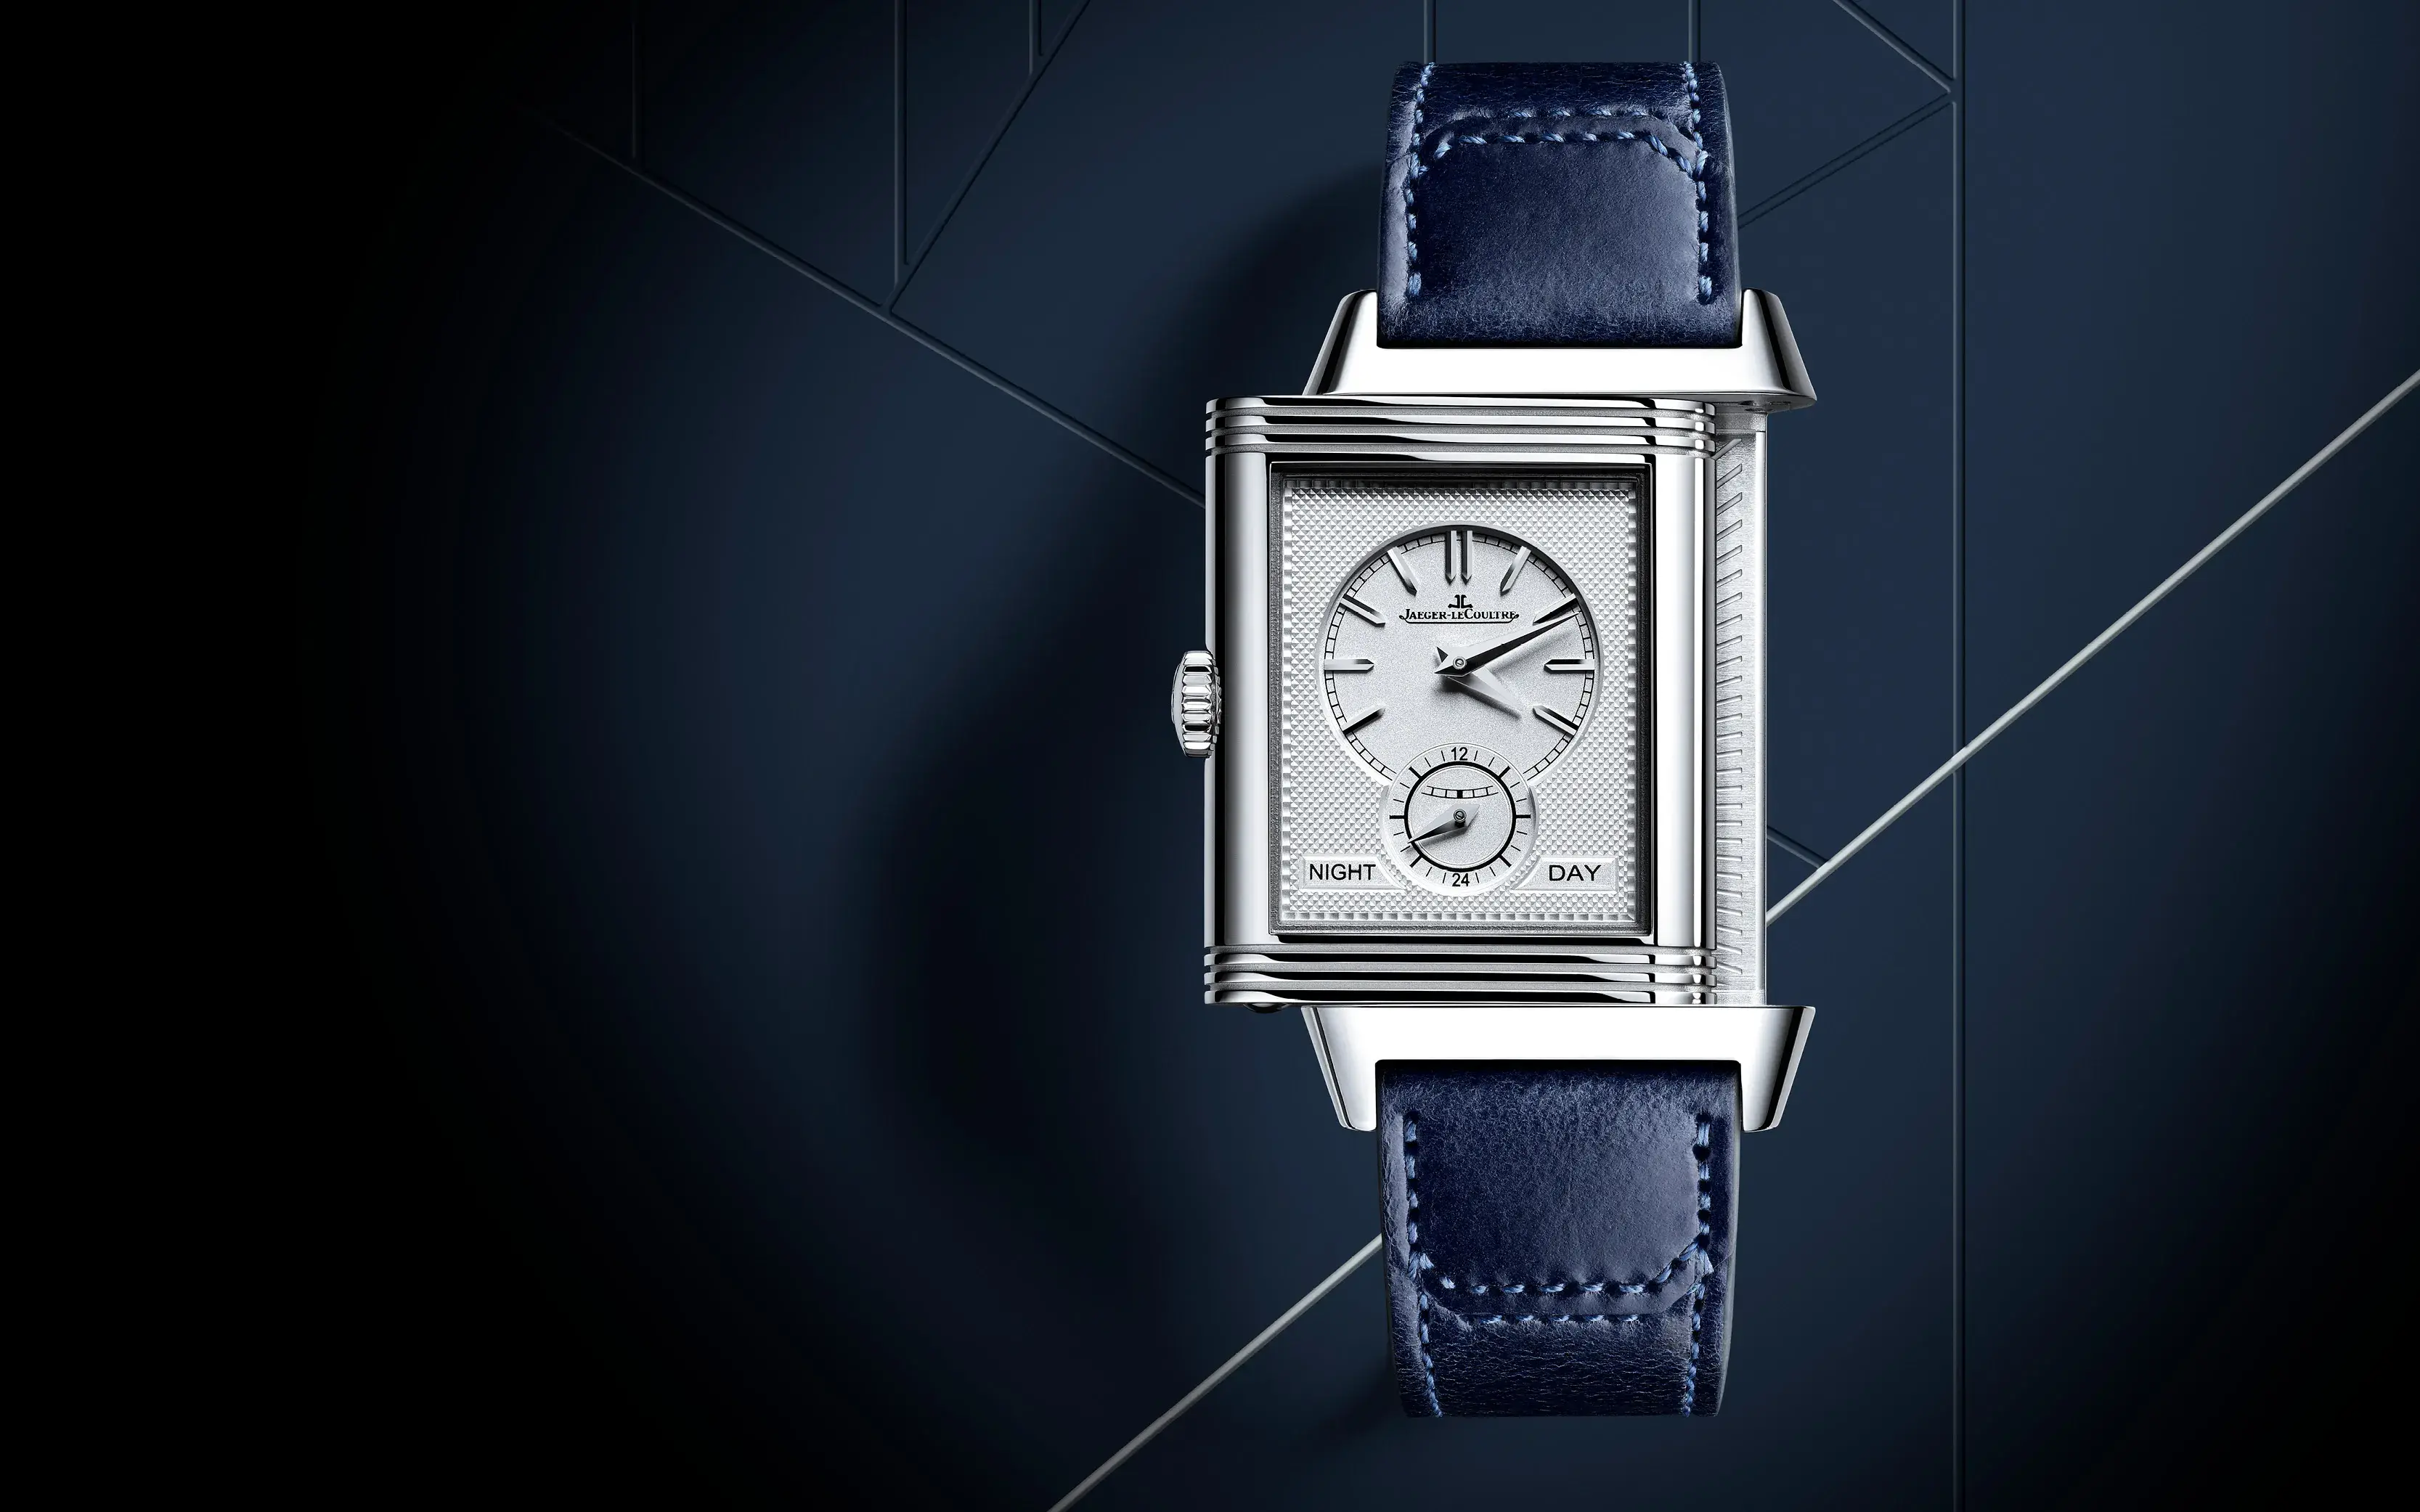 Jaeger-LeCoultre Reverso watch